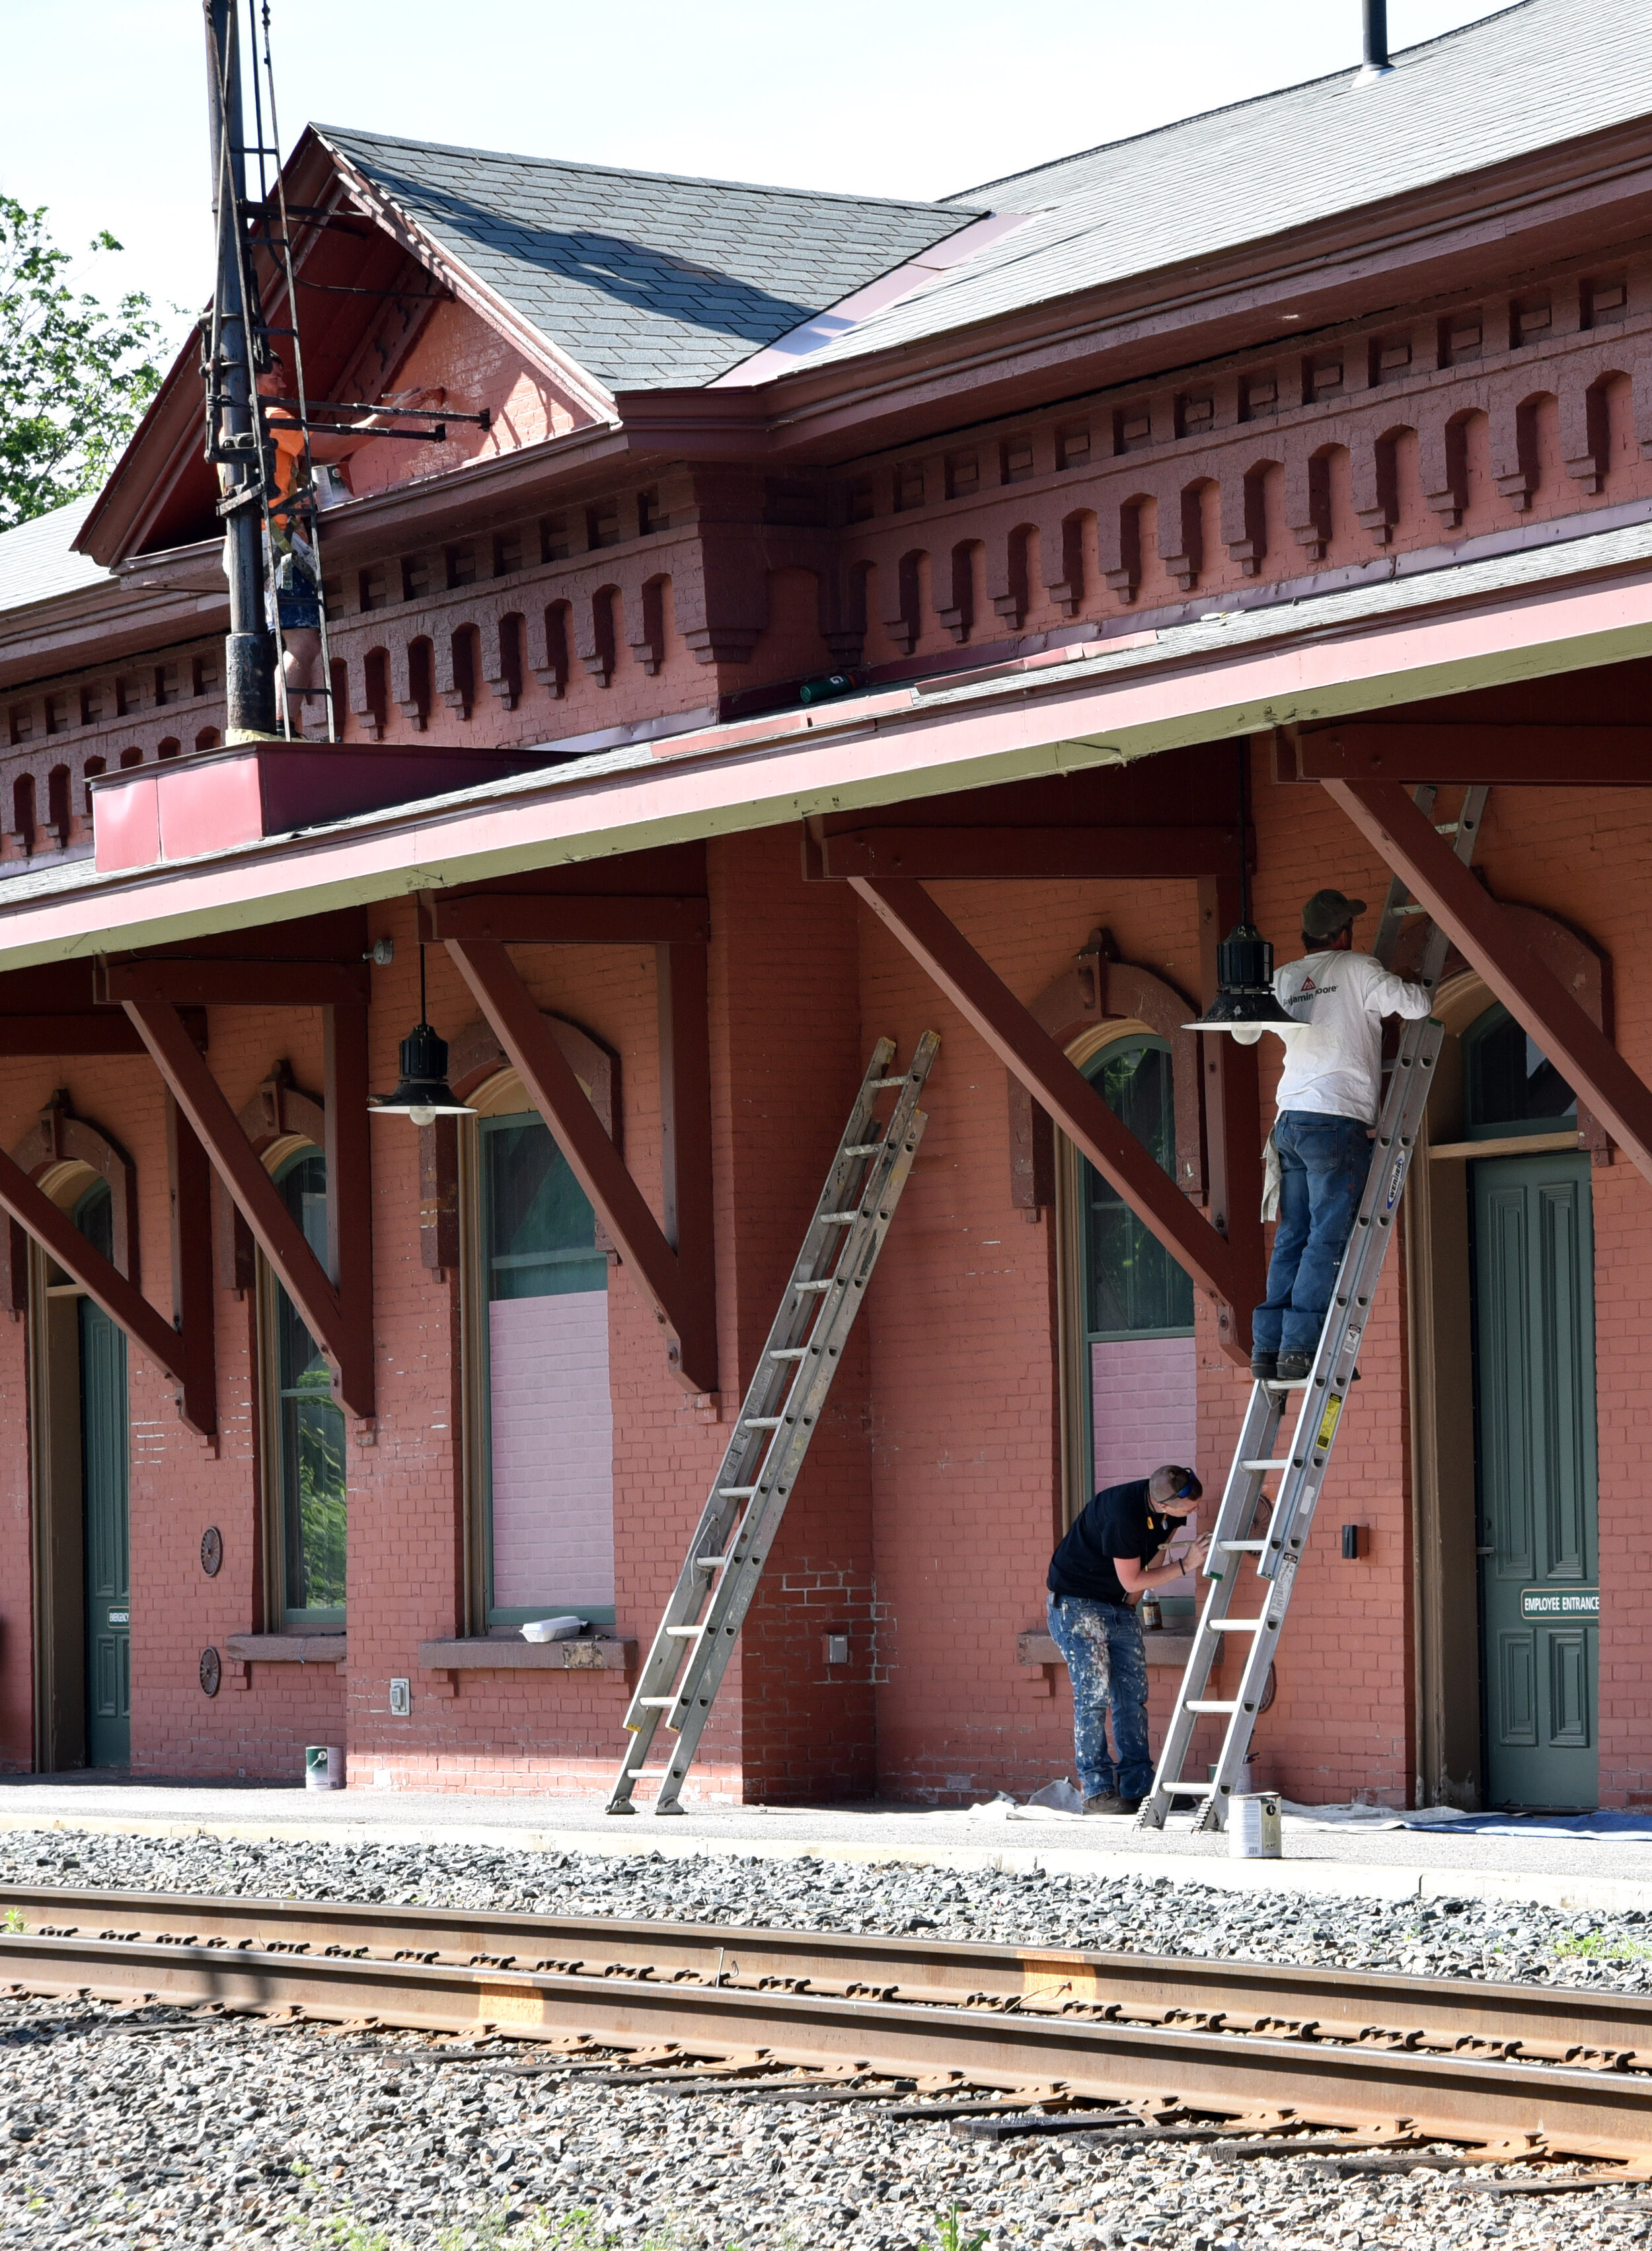   Workers from Russ/Wood Decorating in Richmond are repainting the entire exterior of the Waterbury Train Station. Photo by Gordon Miller.  